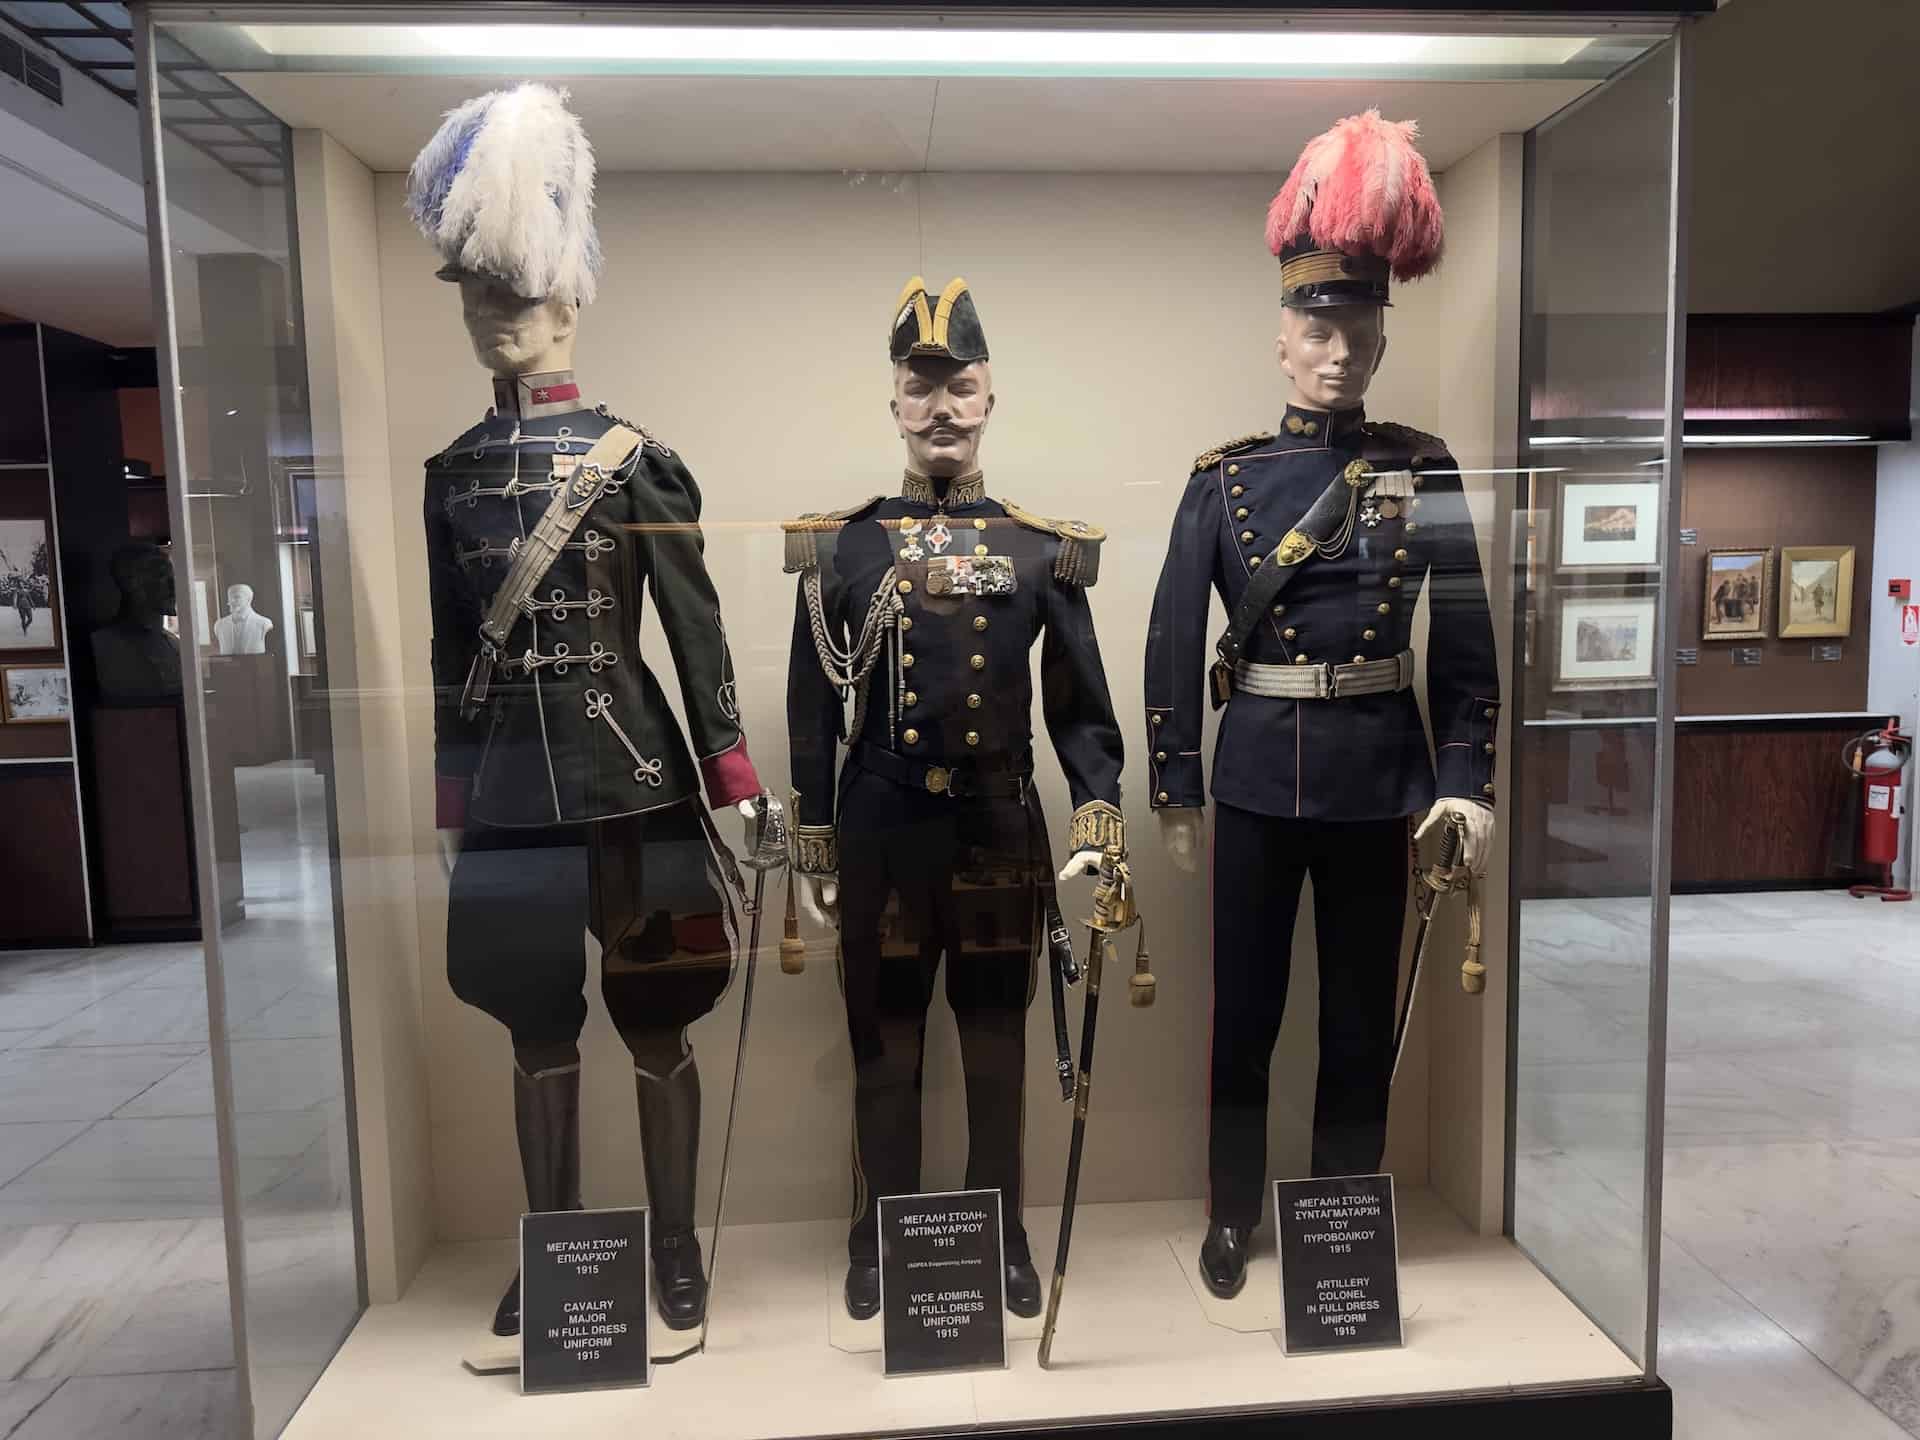 Cavalry major in full dress uniform, 1915 (left); Vice admiral in full dress uniform (center); Artillery colonel in full dress uniform, 1915 (right) at the War Museum in Athens, Greece